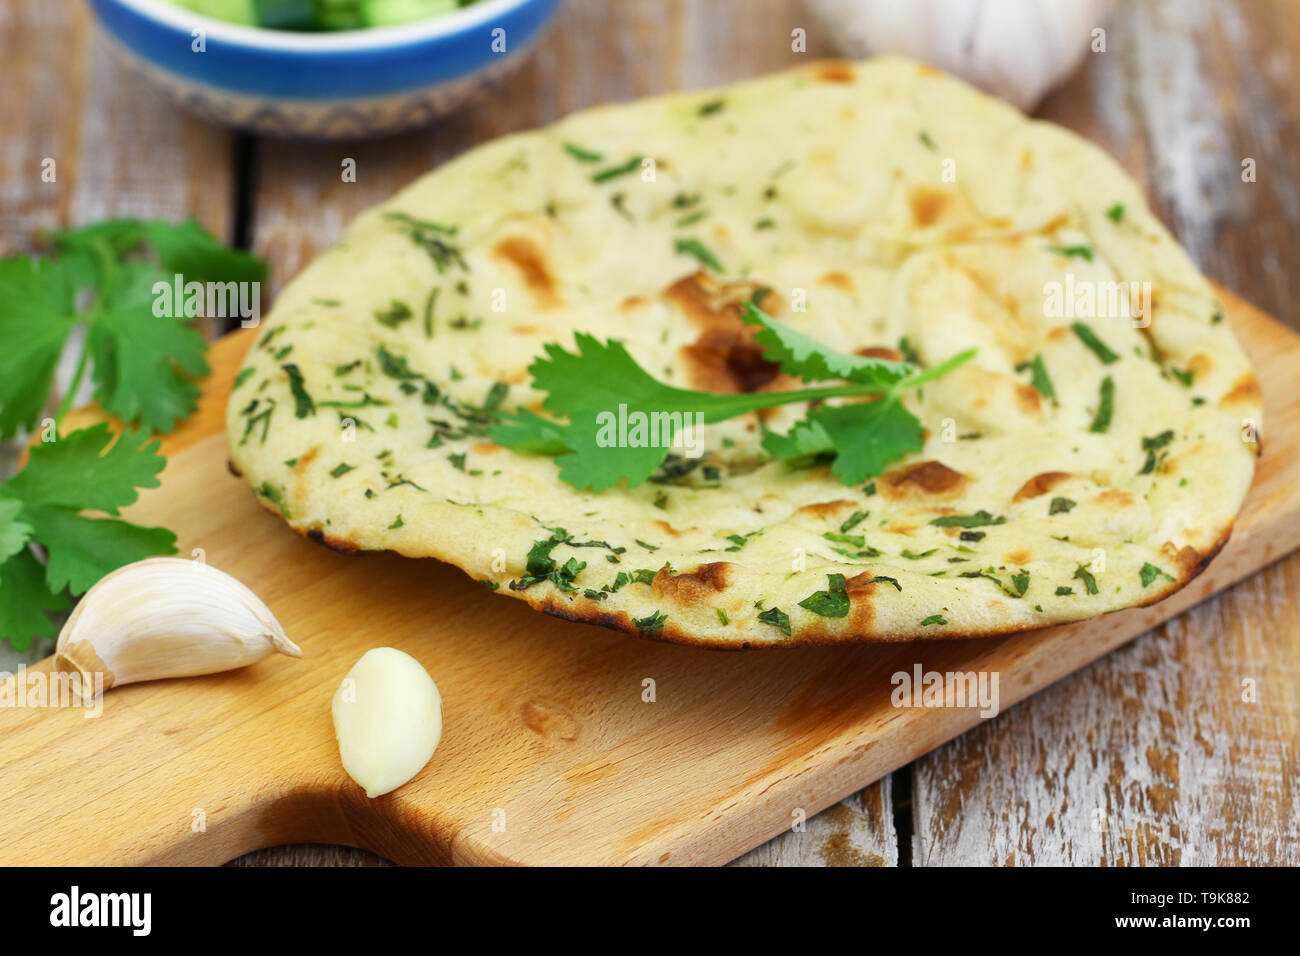 Freshly made Indian nan bread with fresh coriander and garlic on wooden board Stock Photo